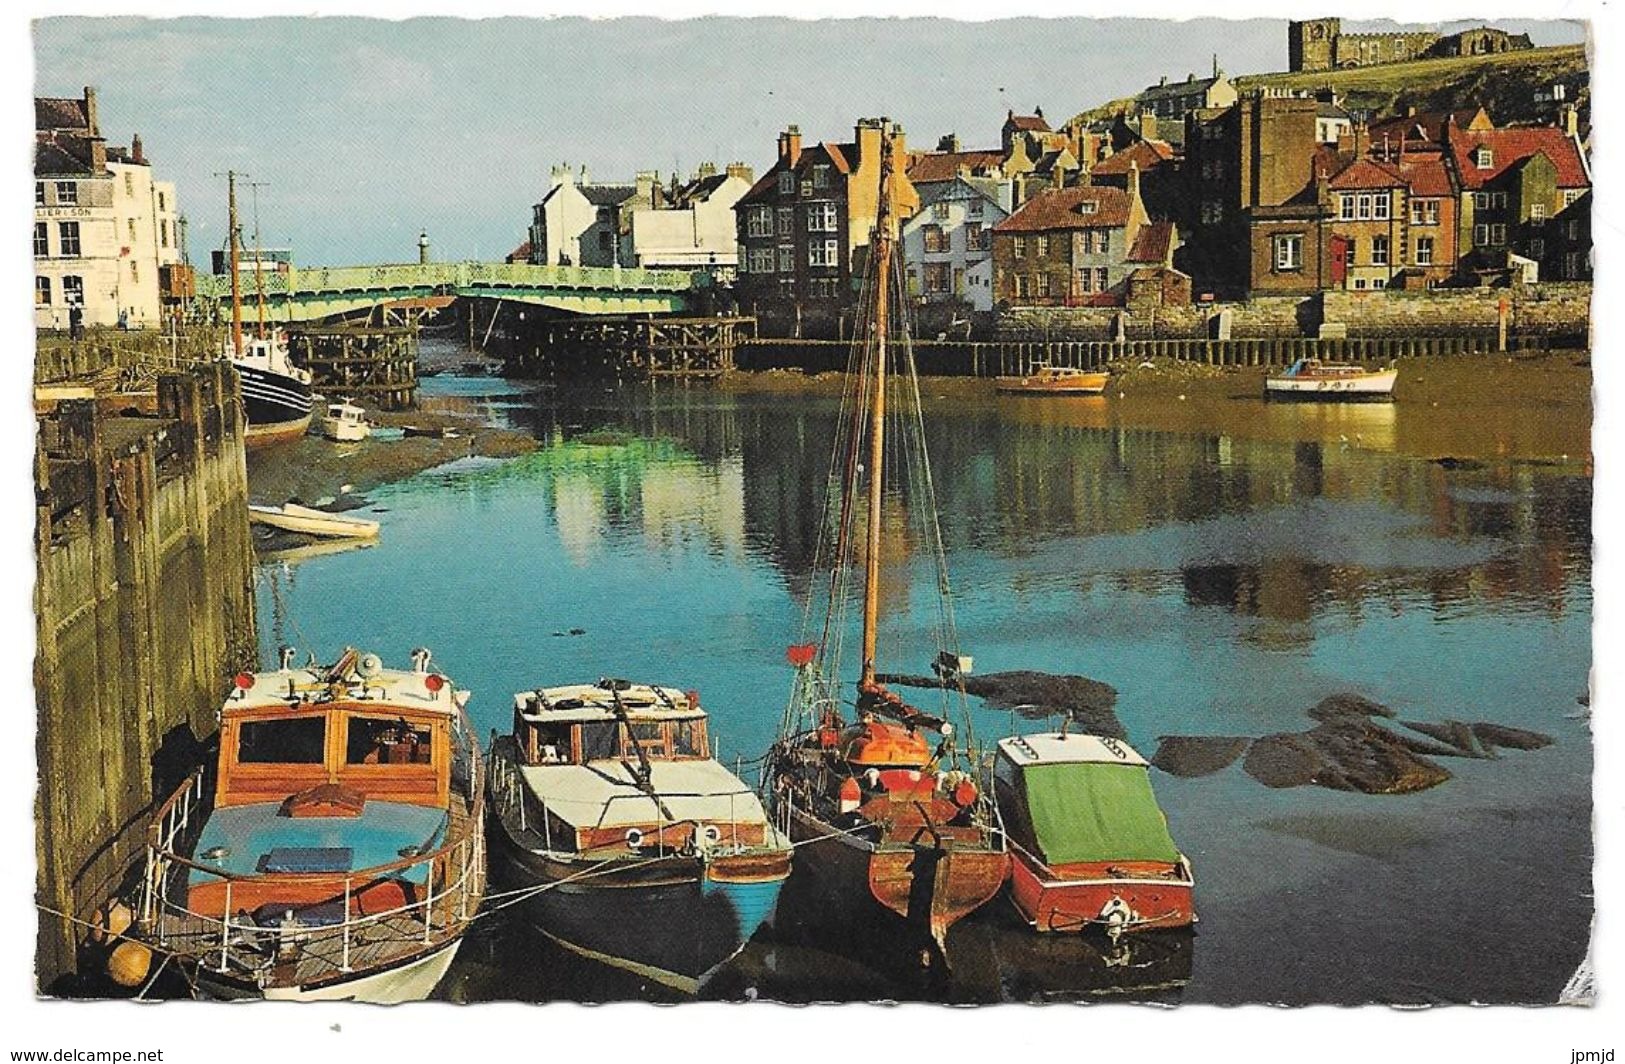 WHITBY - Upper Harbour - Whitby